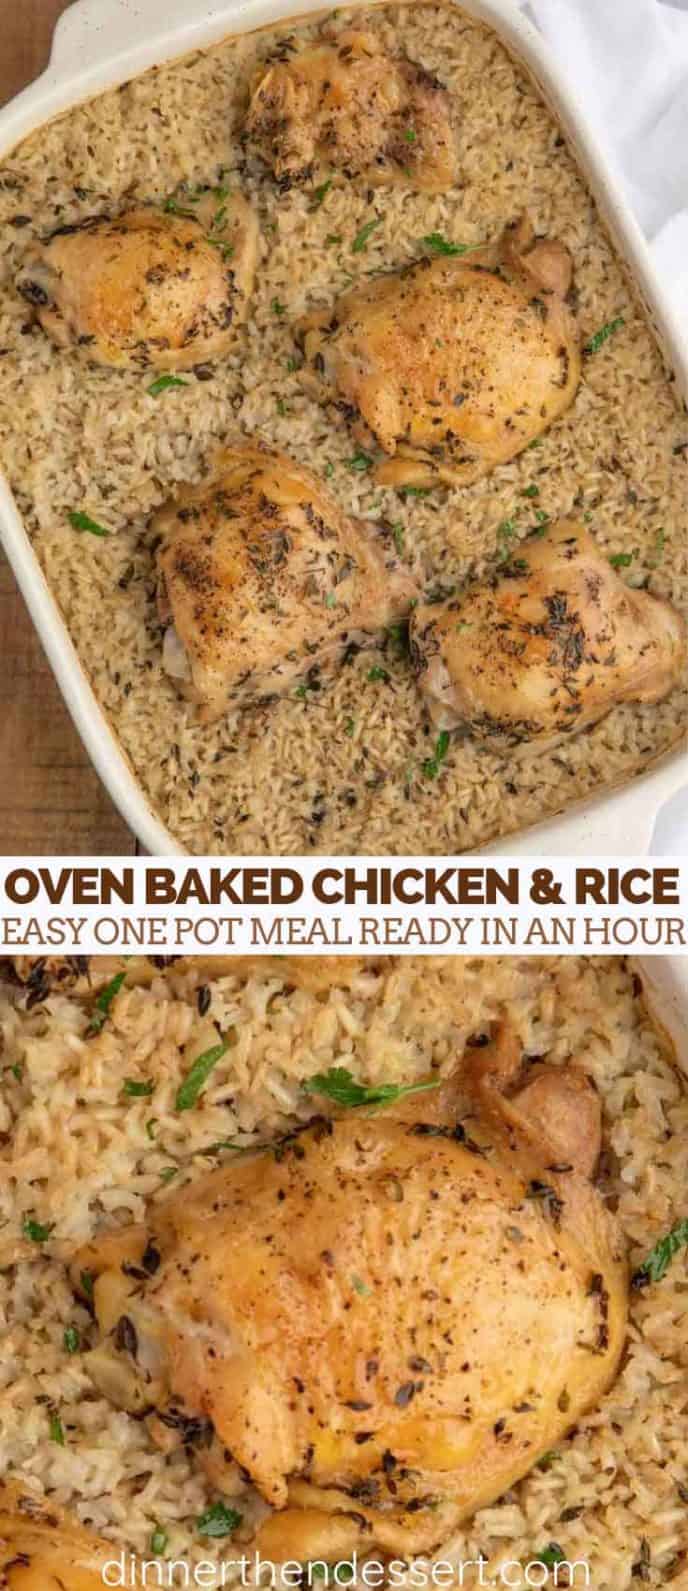 Oven baked chicken and rice in pan